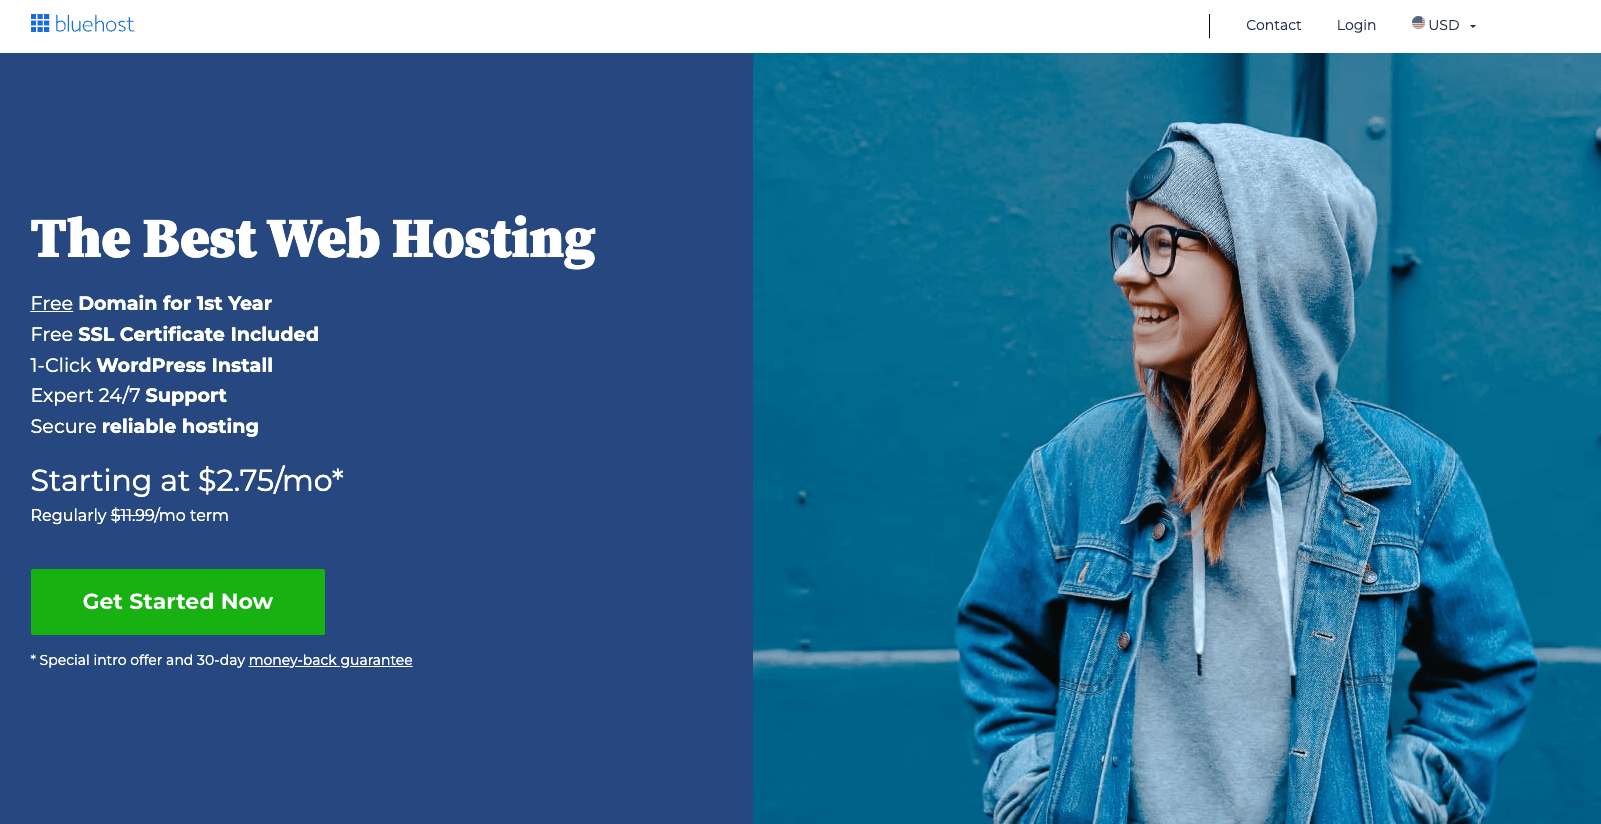 Bluehost will help you register a domain name for free.